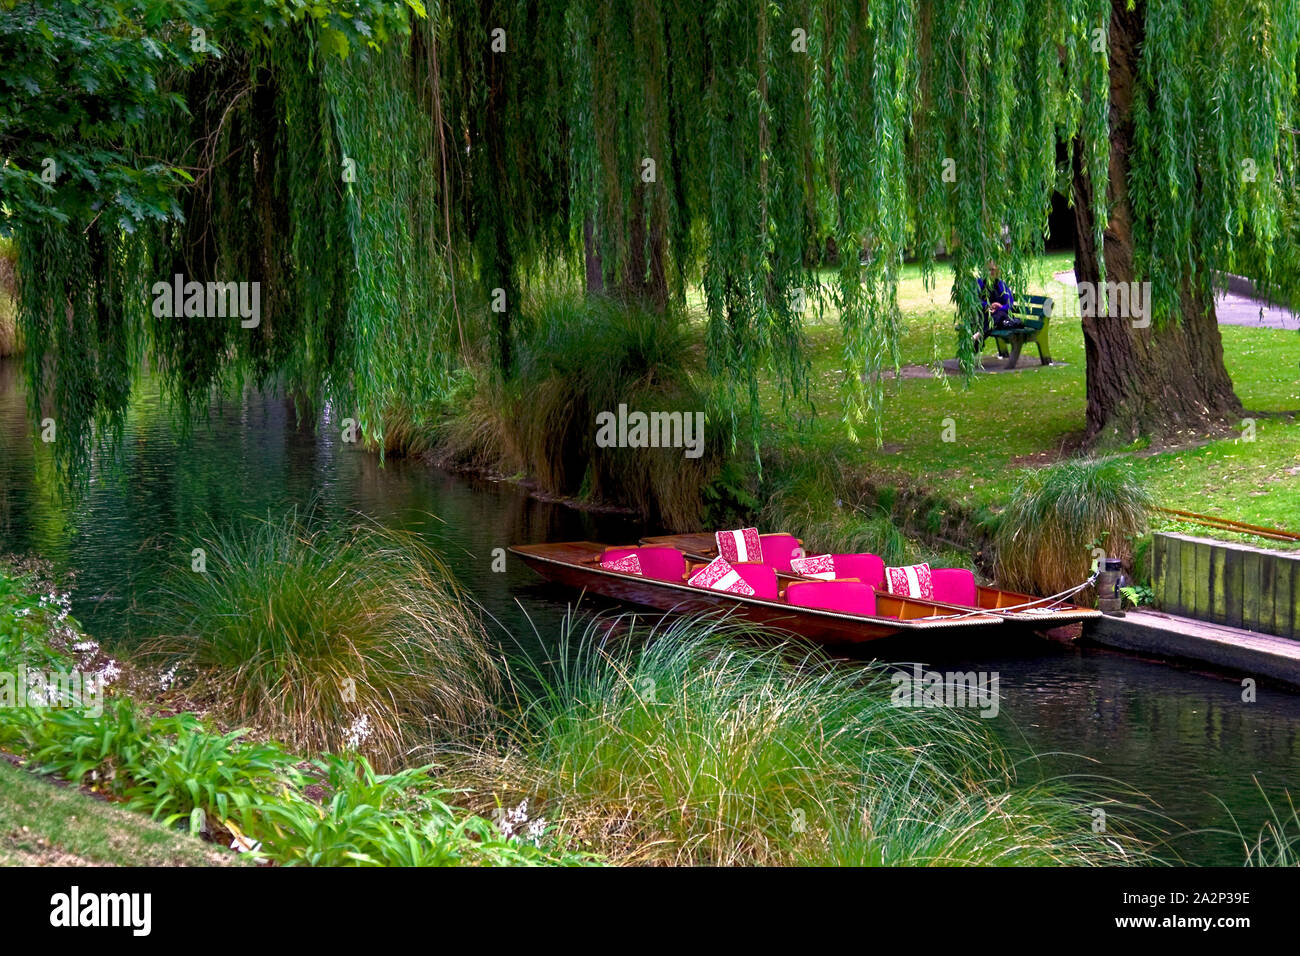 2 punting boats, tied up; waiting; recreation; ride; colorful cushions, Avon River; weeping willow tree; serene, Christchurch; New Zealand; summer; ho Stock Photo